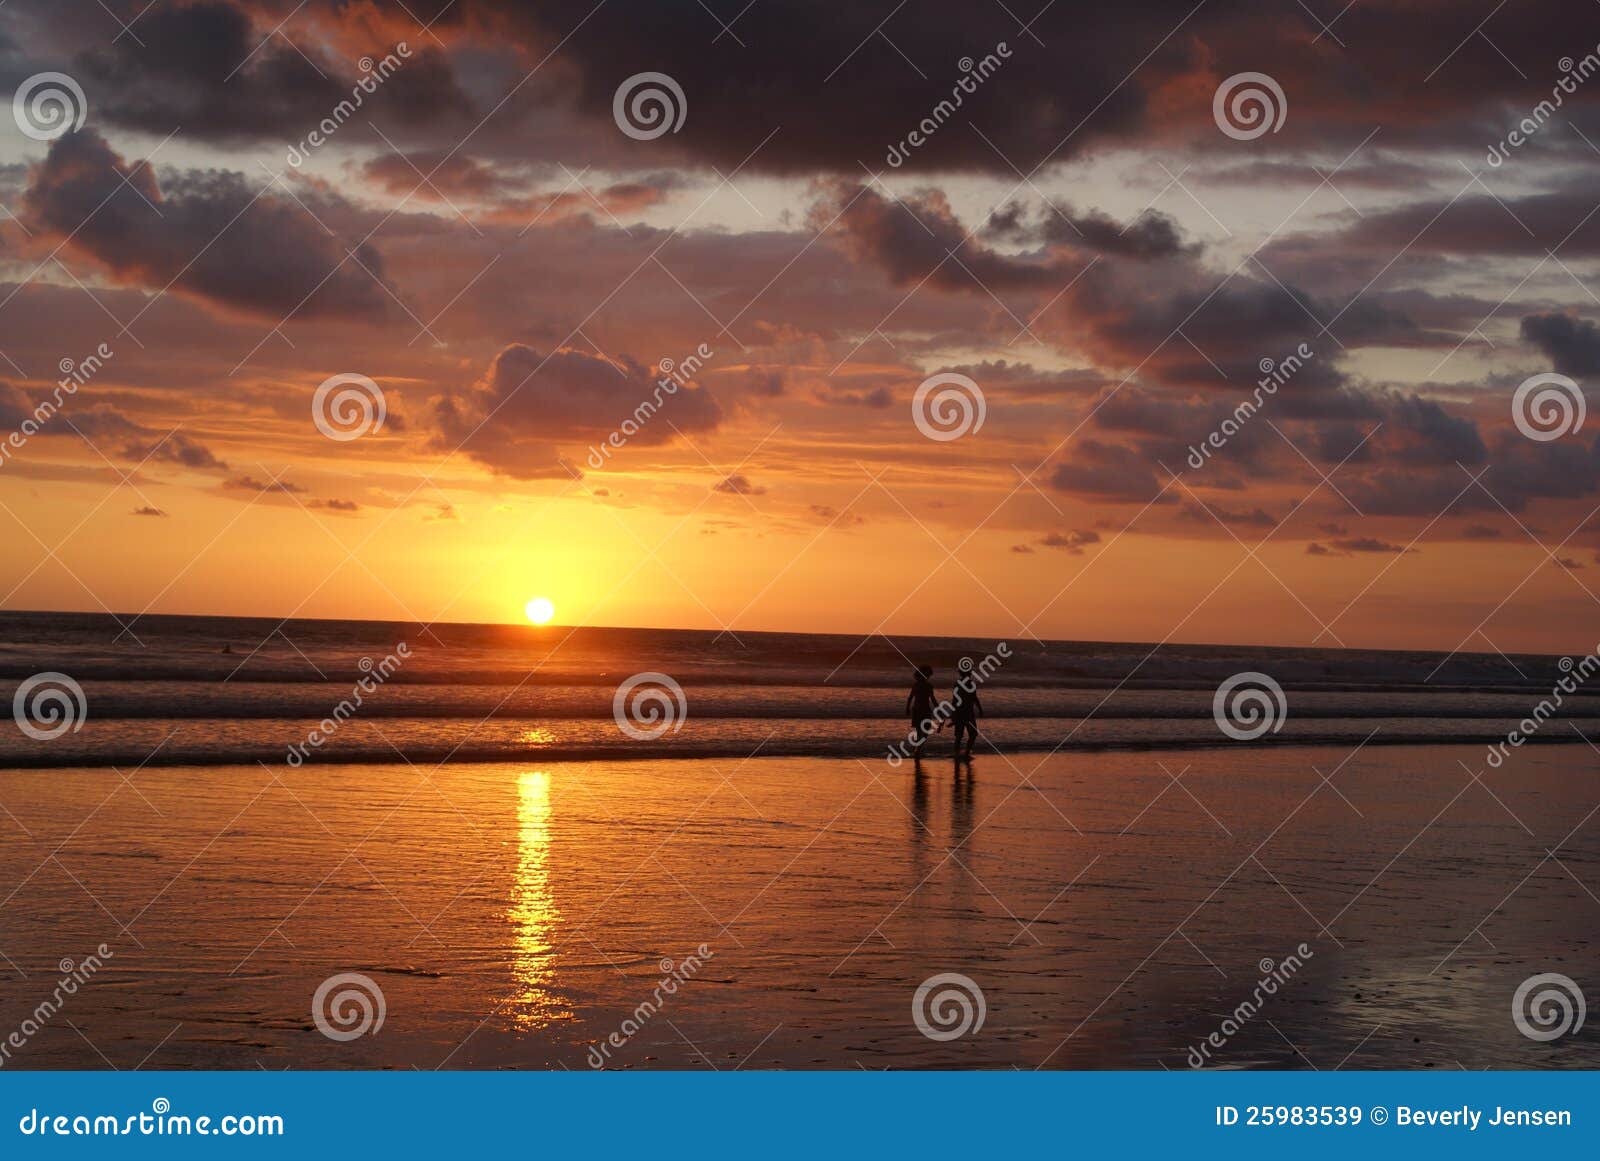 Pacific Sunset in Costa Rica Stock Image - Image of rica, cloudy: 25983539